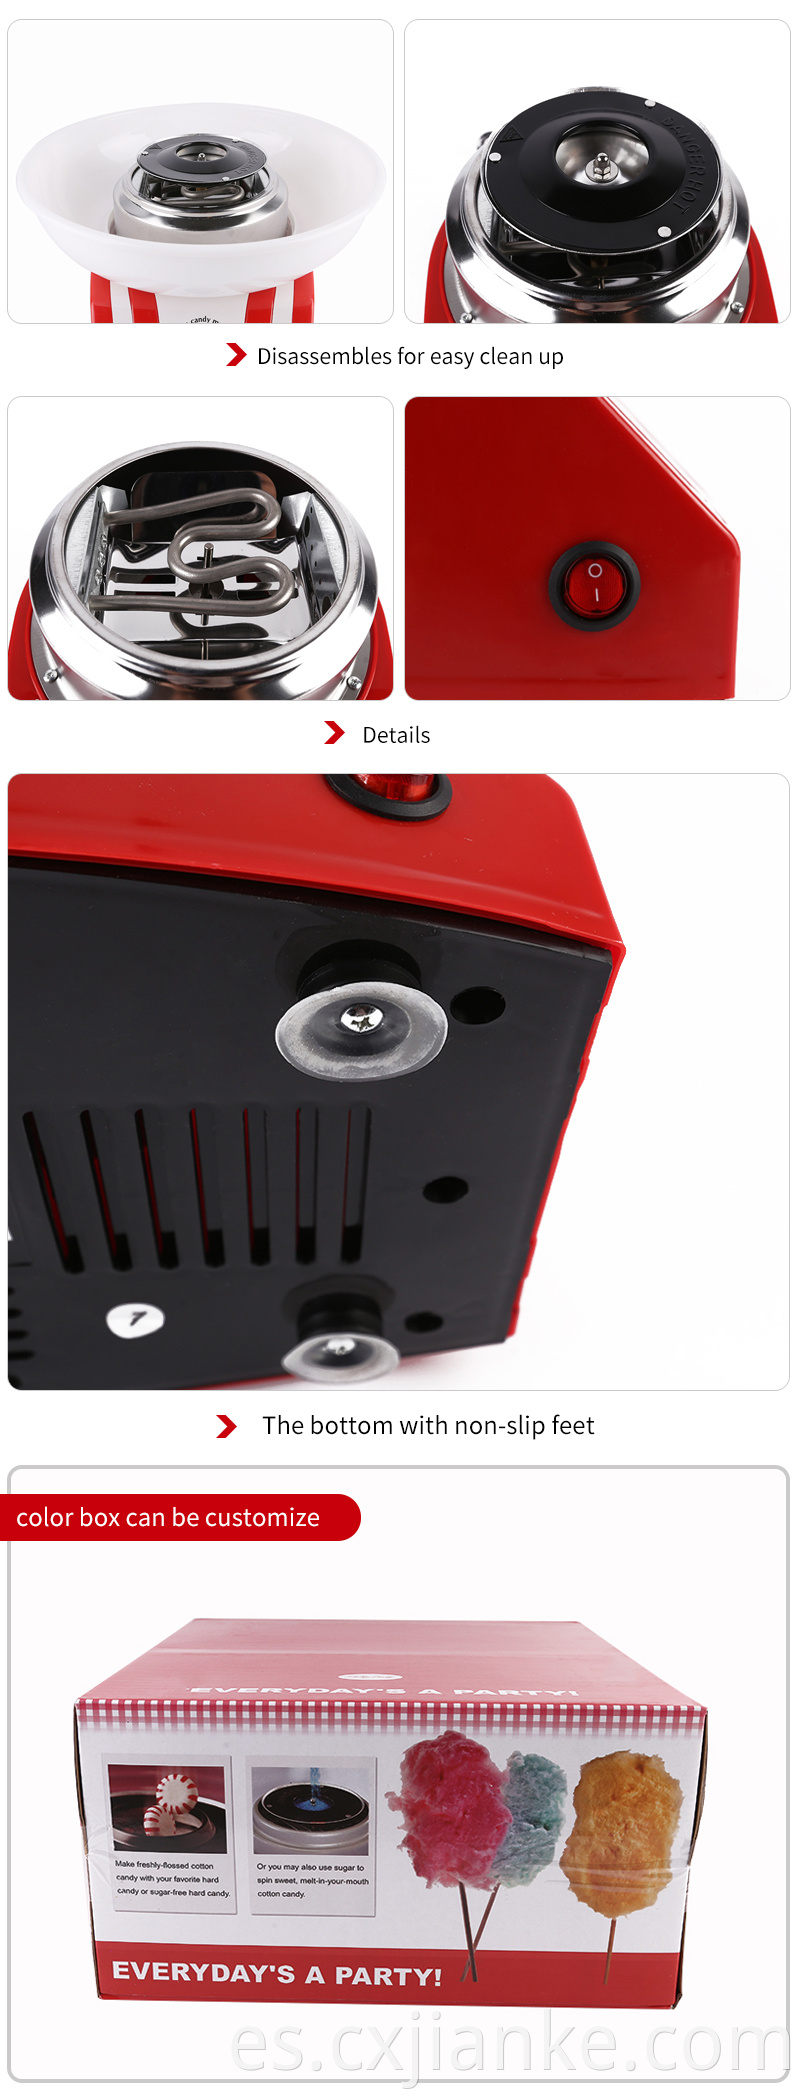 2018 Hot Sale Home Party Electric Algody Cody Floss Maker